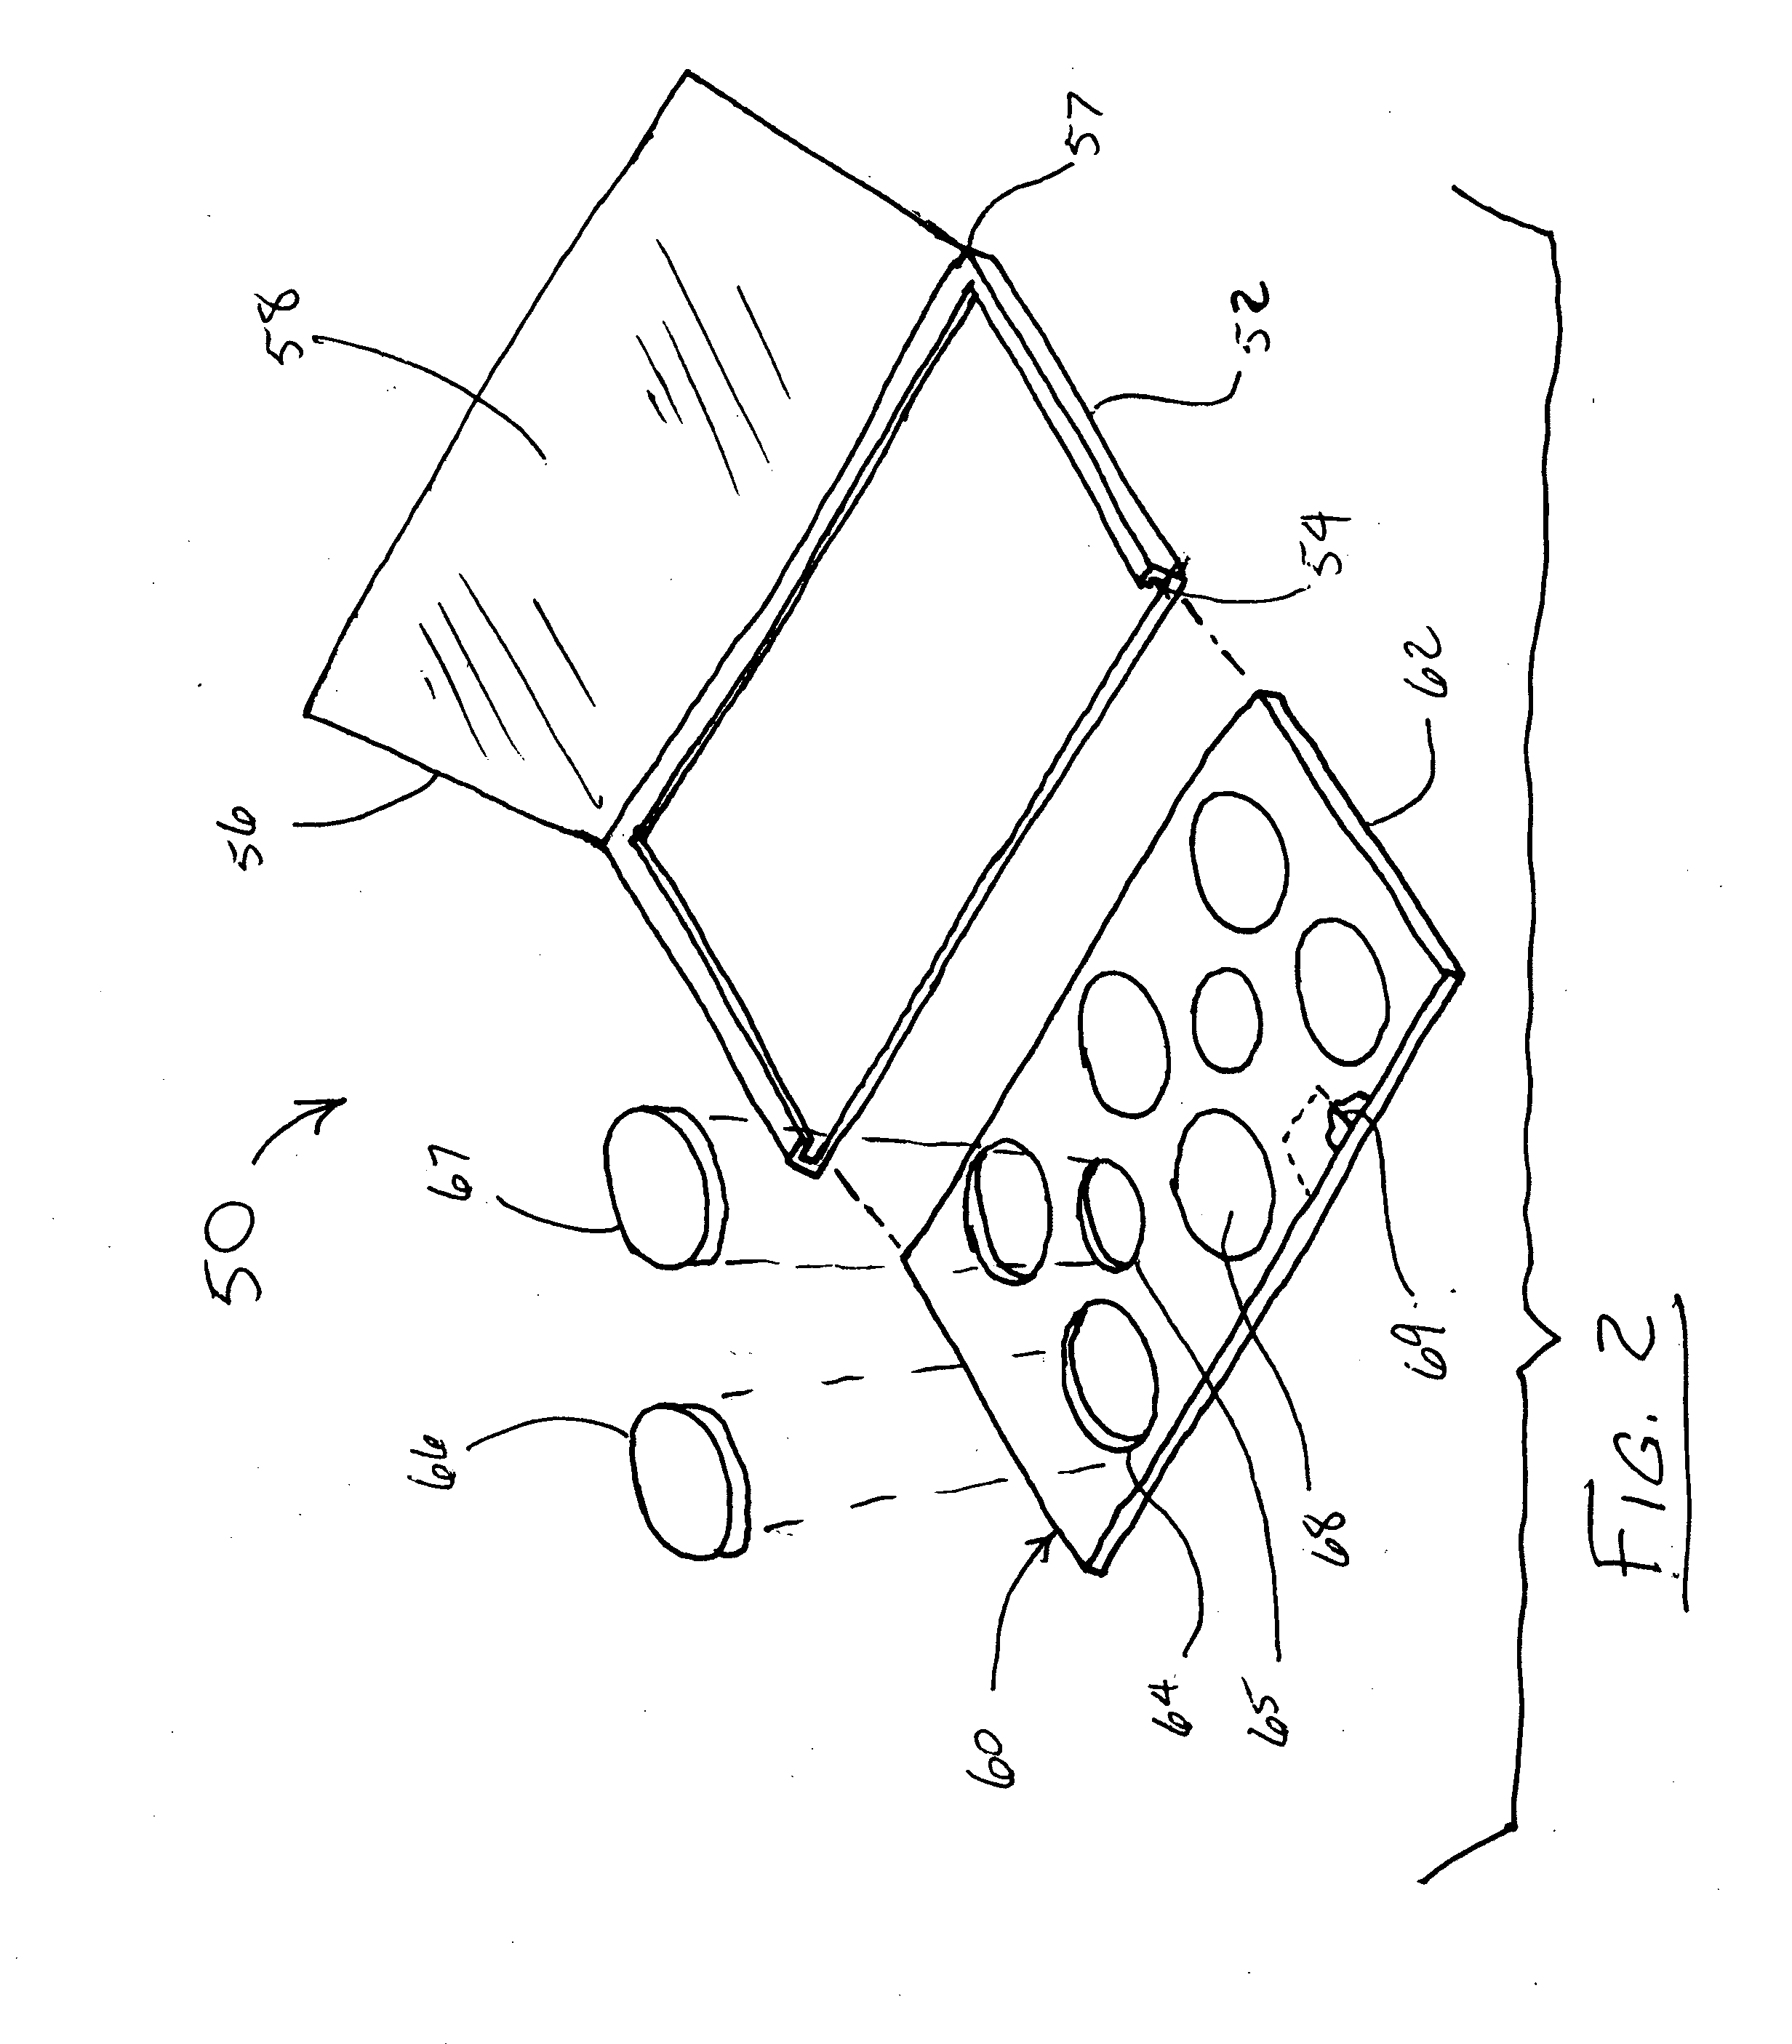 Personal electronics device with cosmetics compartment